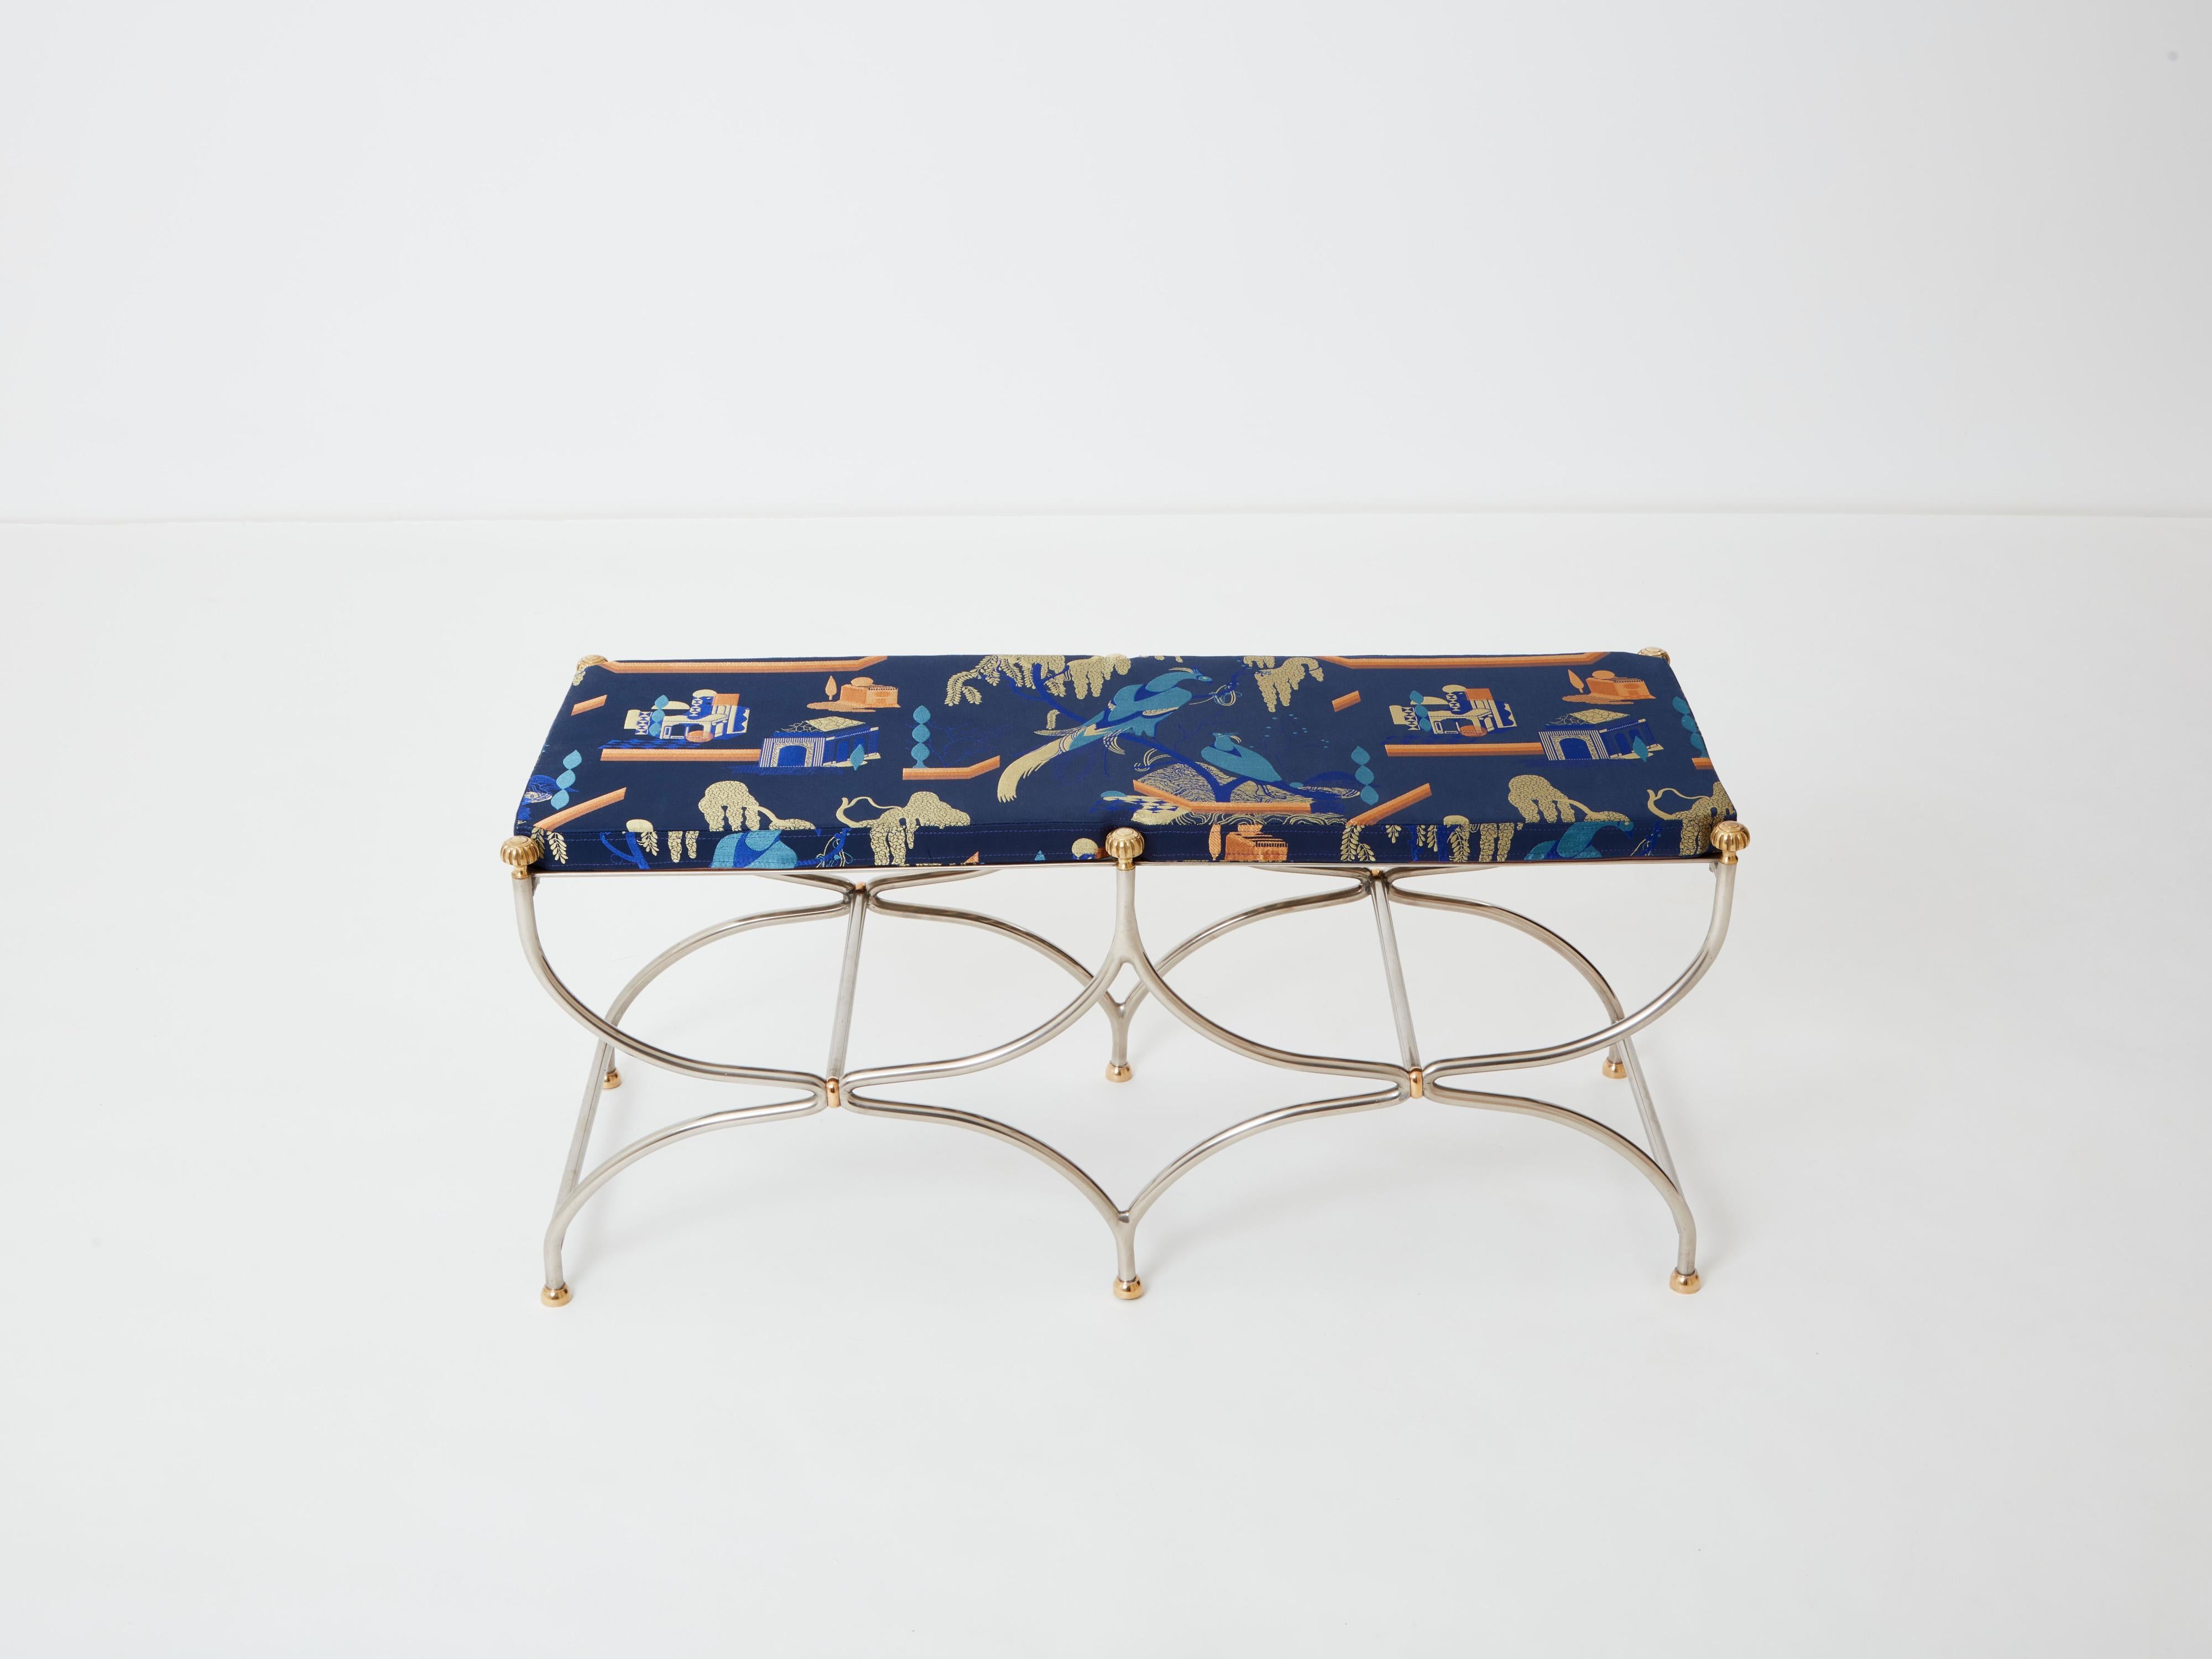 Neoclassical steel brass curule bench by Maison Jansen 1960s For Sale 6